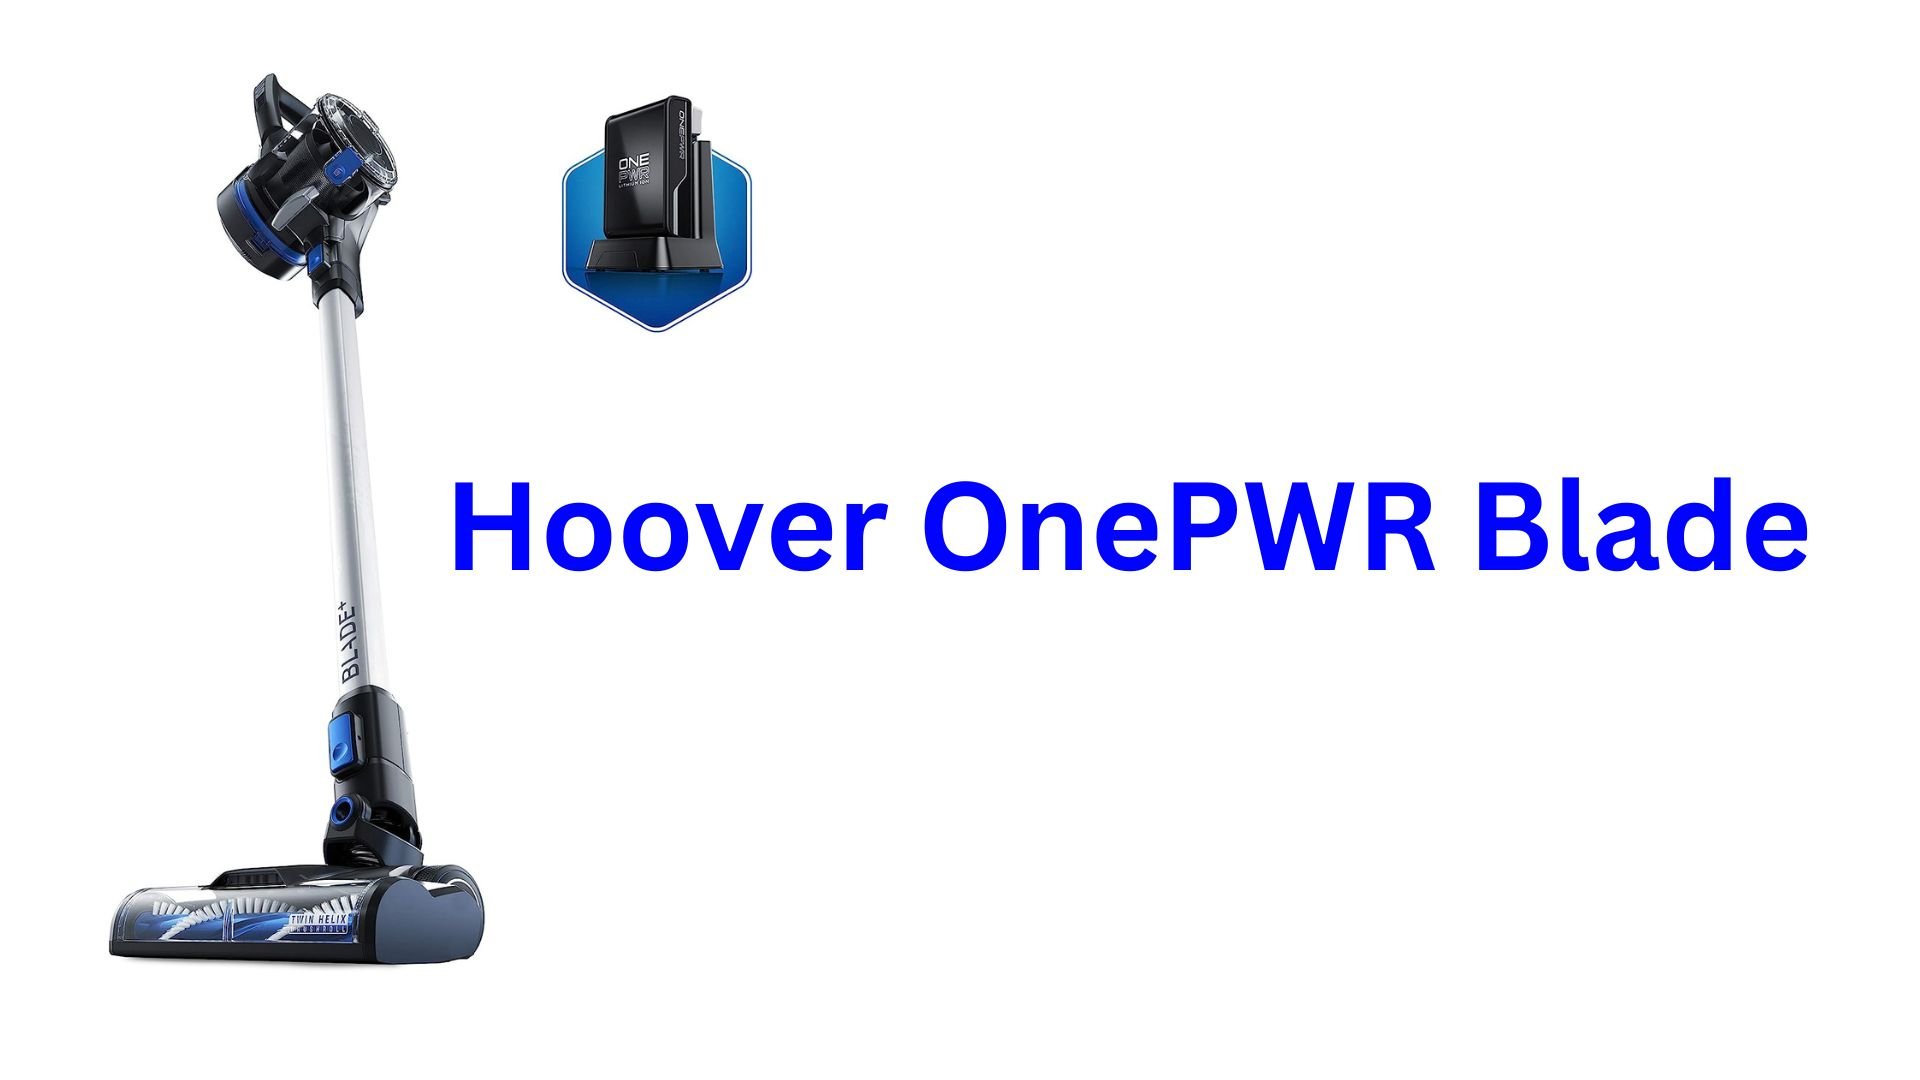 Hoover OnePWR Blade Review